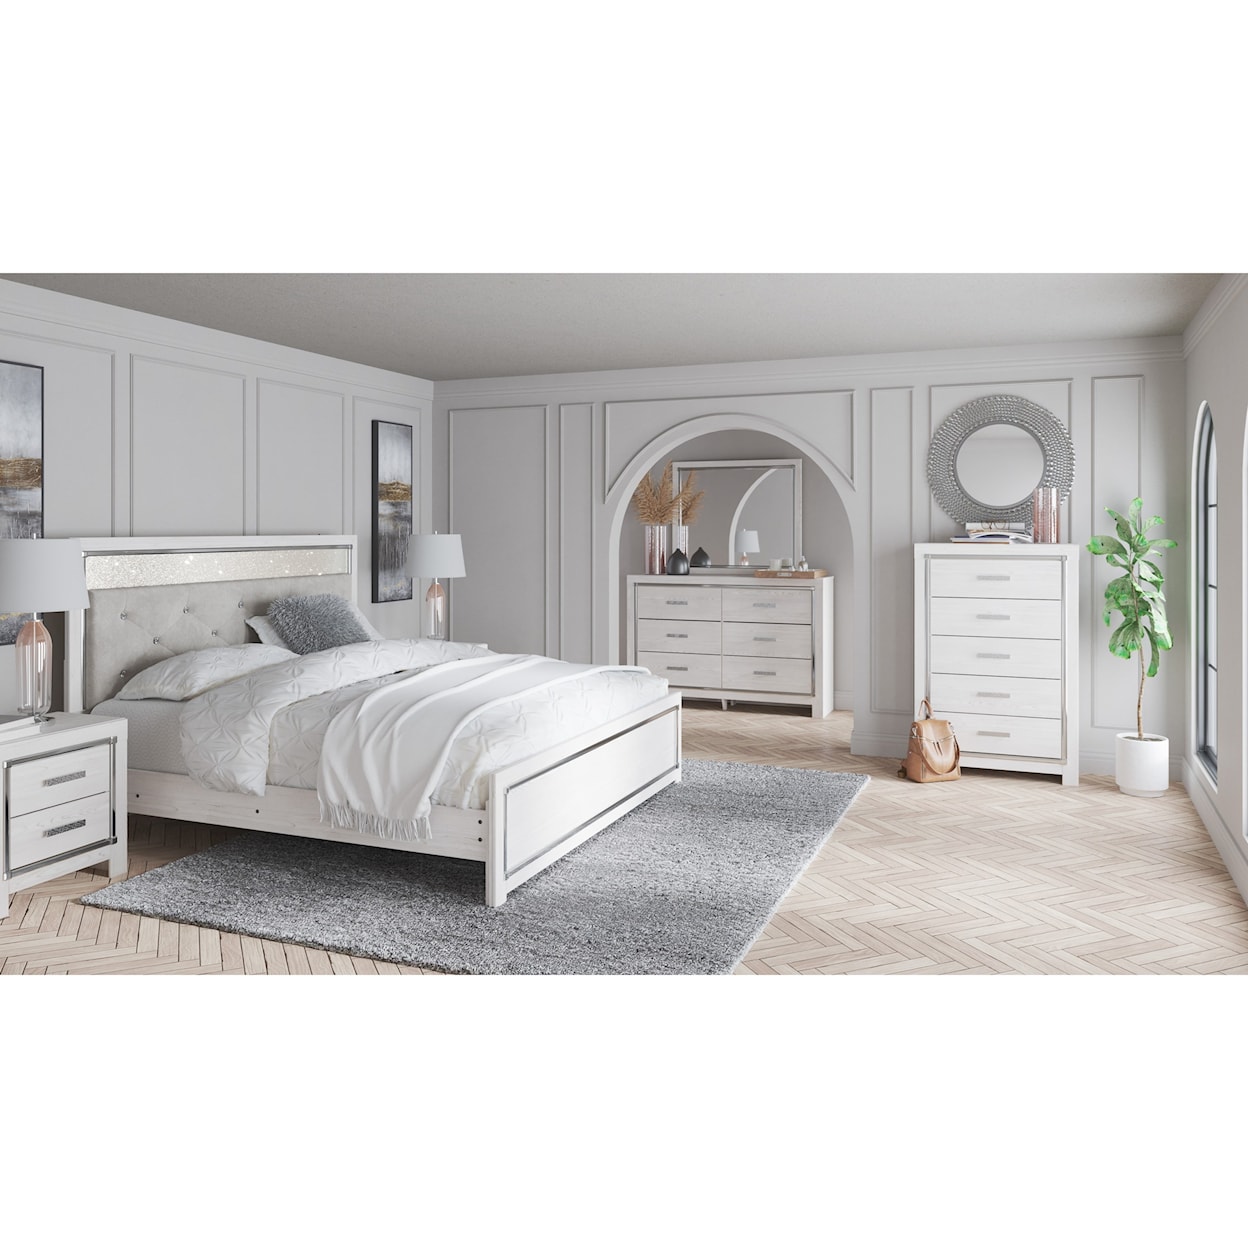 Signature Design by Ashley Altyra 6PC Queen Bedroom